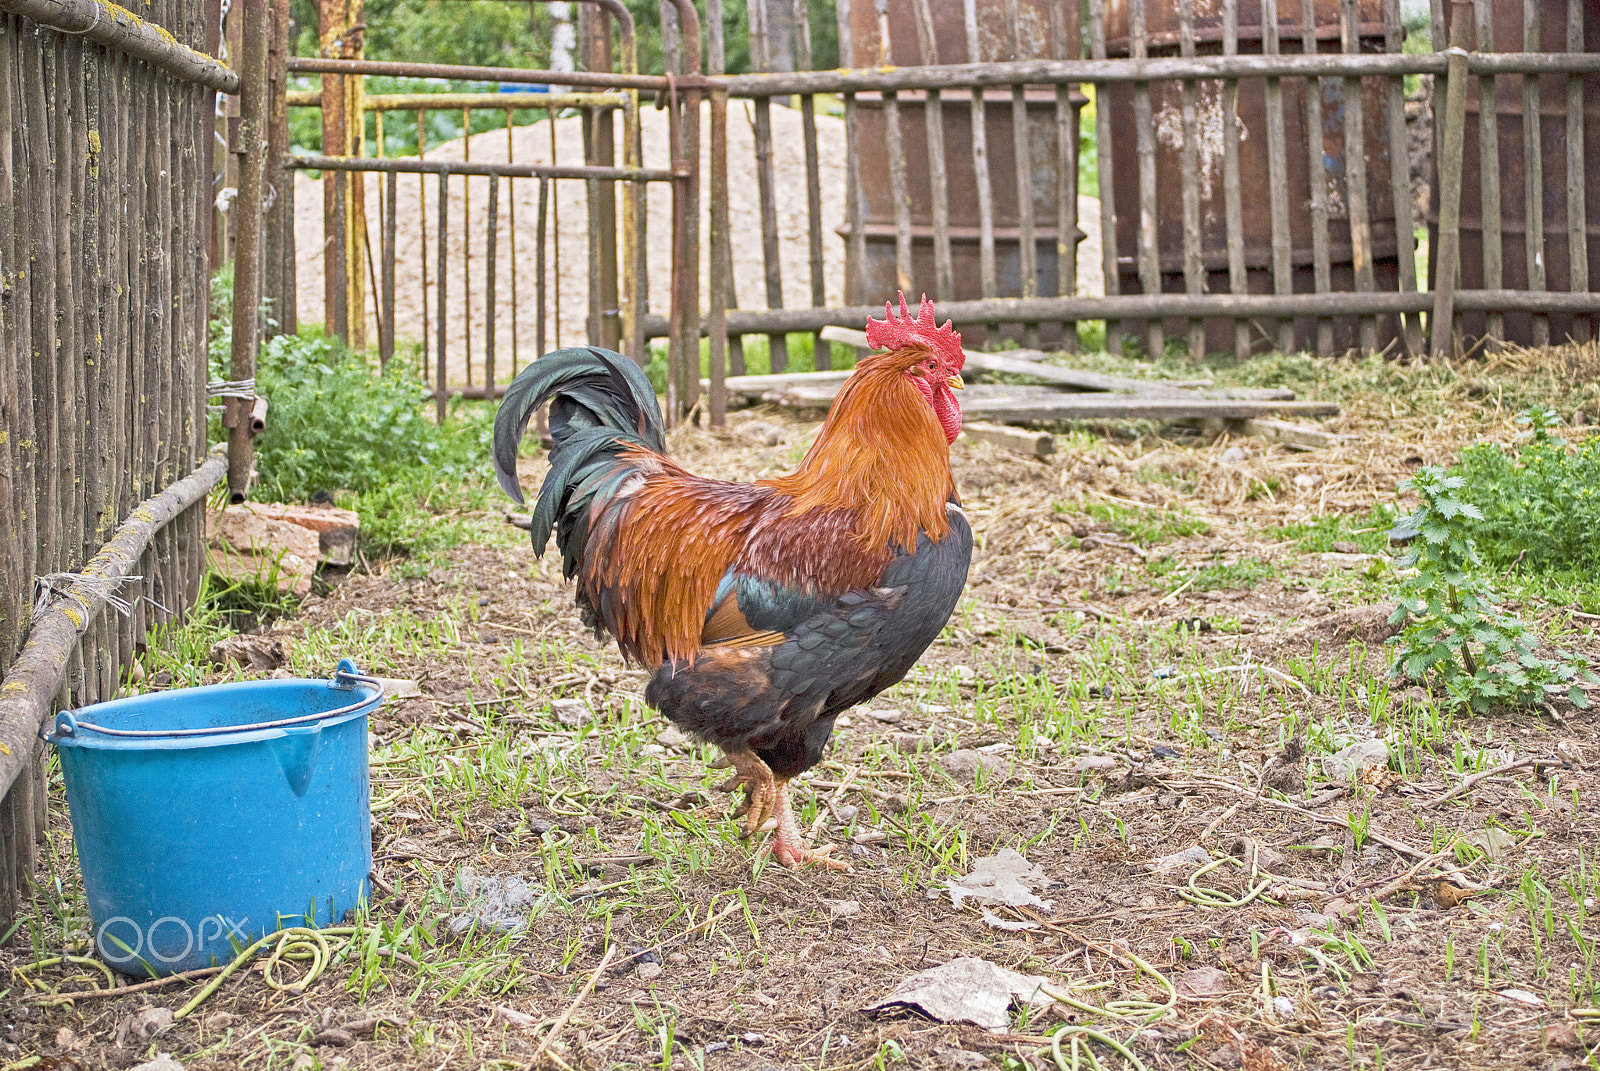 Sigma 18-50mm F3.5-5.6 DC sample photo. The rooster enclosure photography